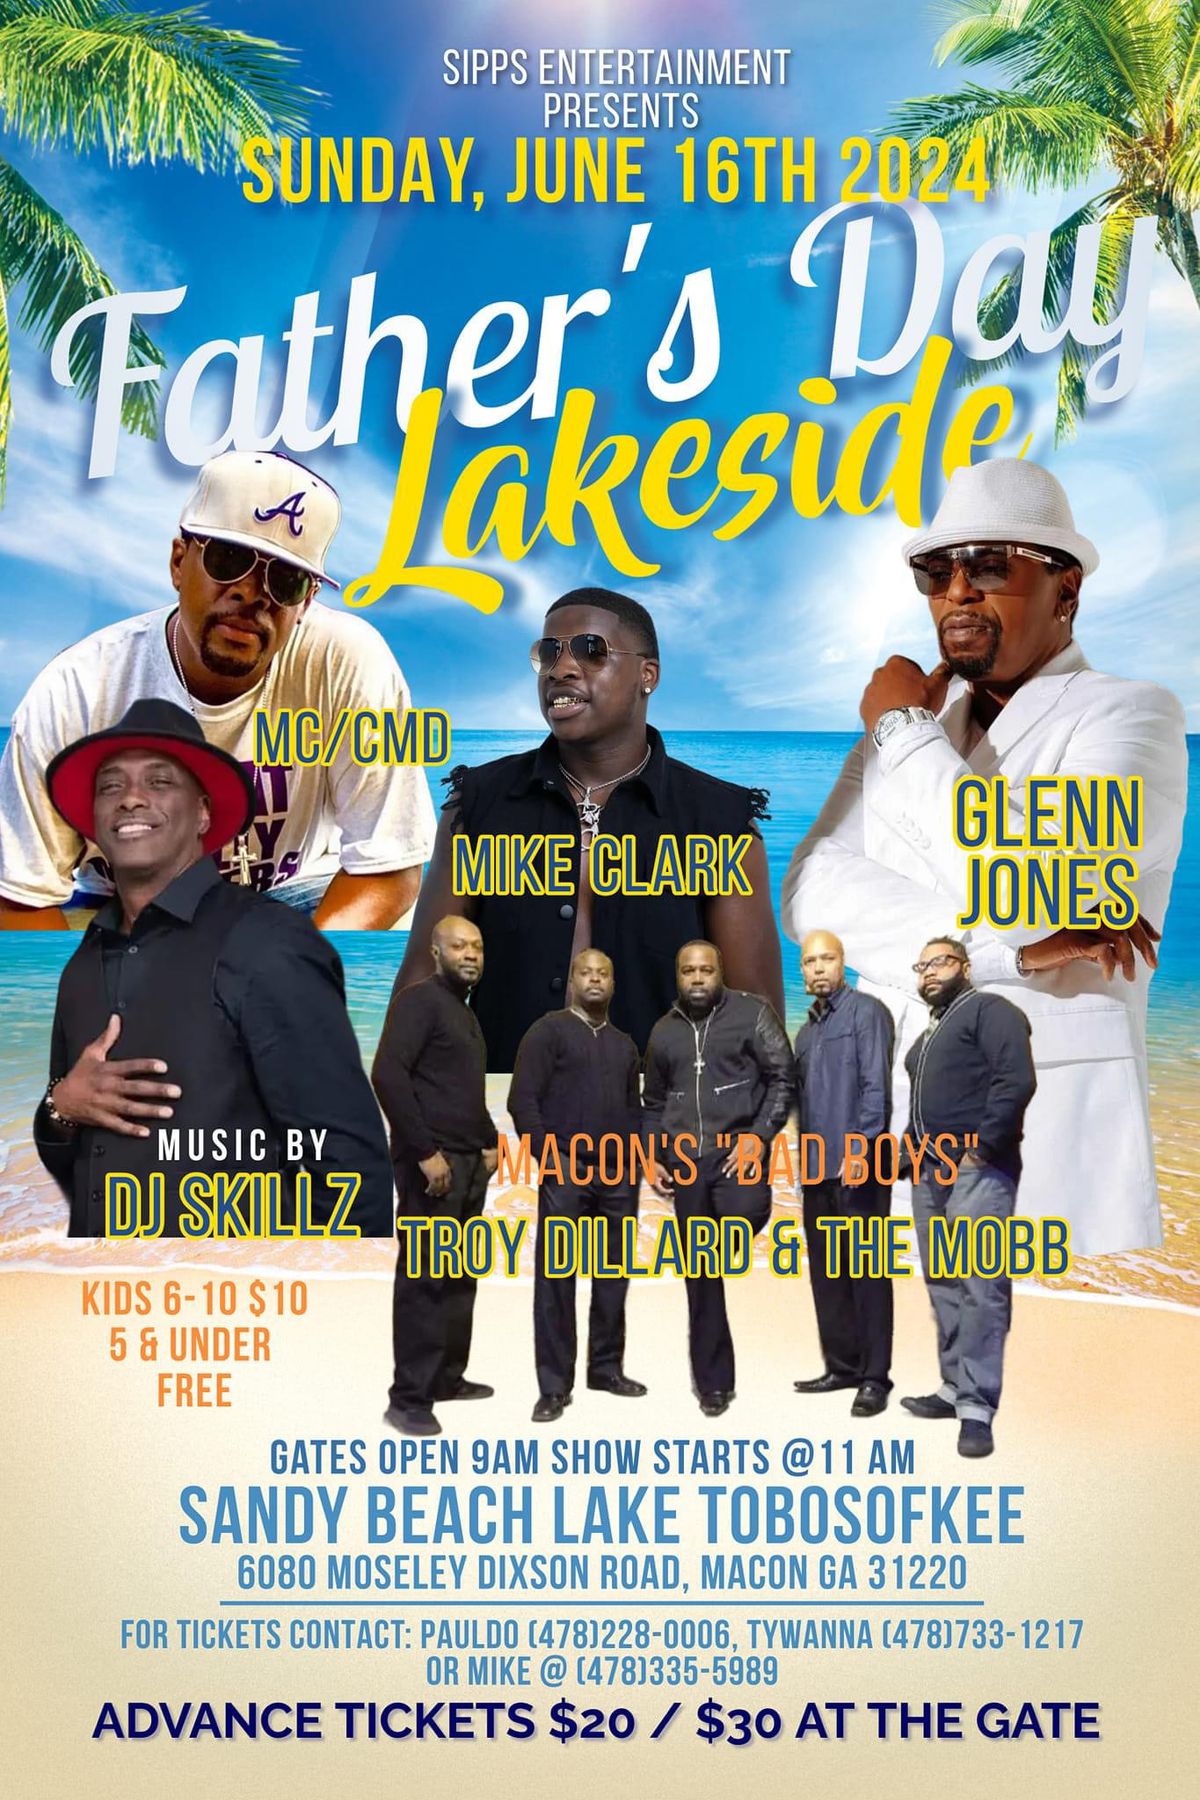 Father's Day Lakeside